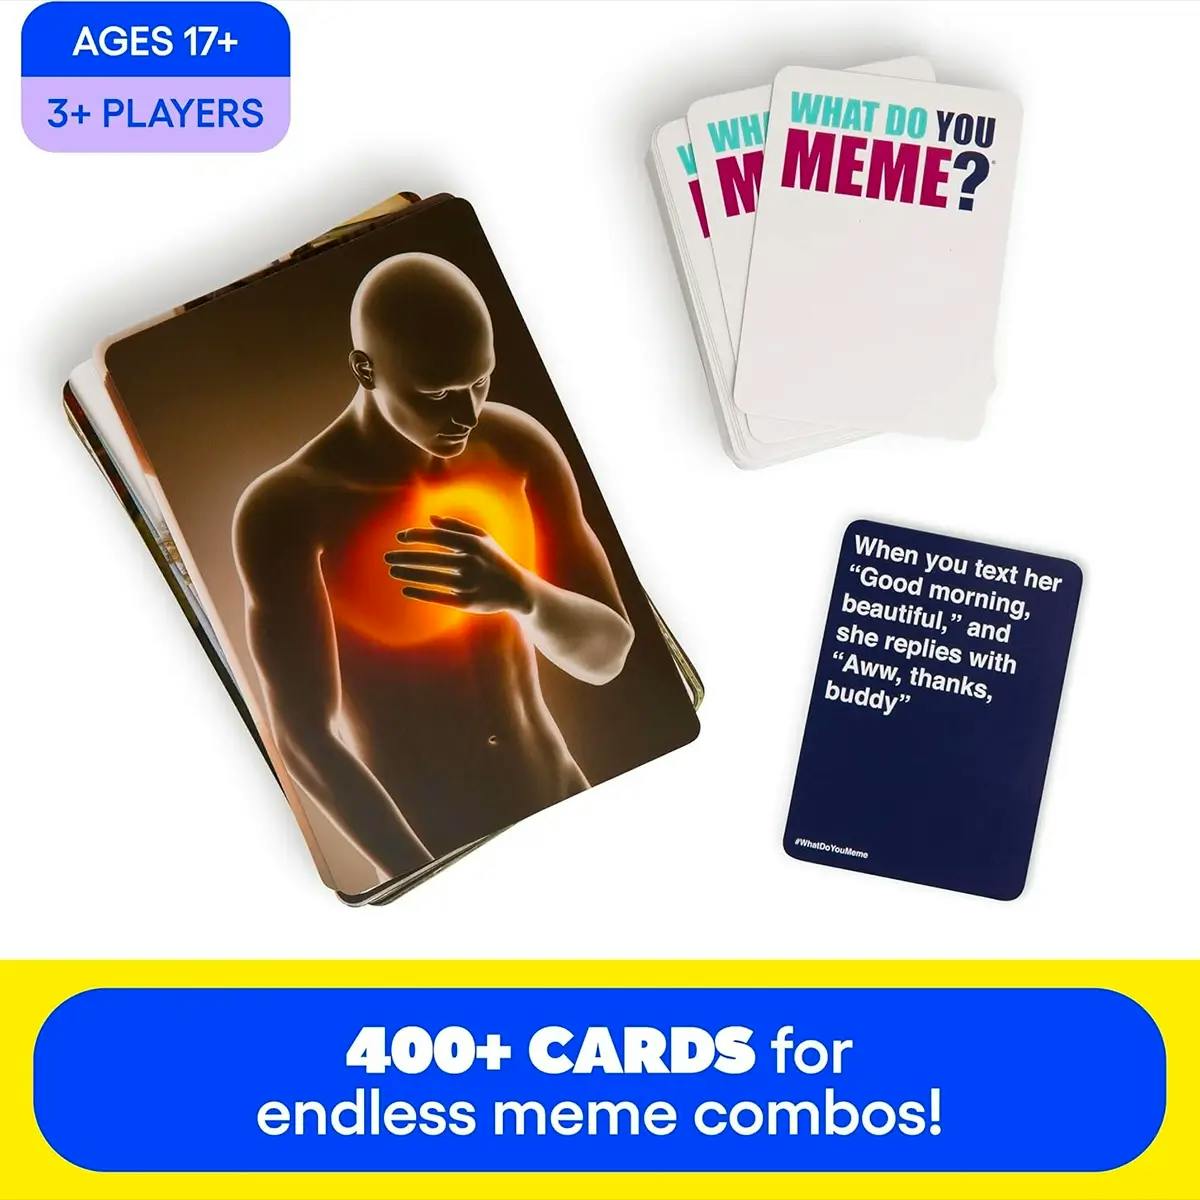 A What Do You Mean game cards.